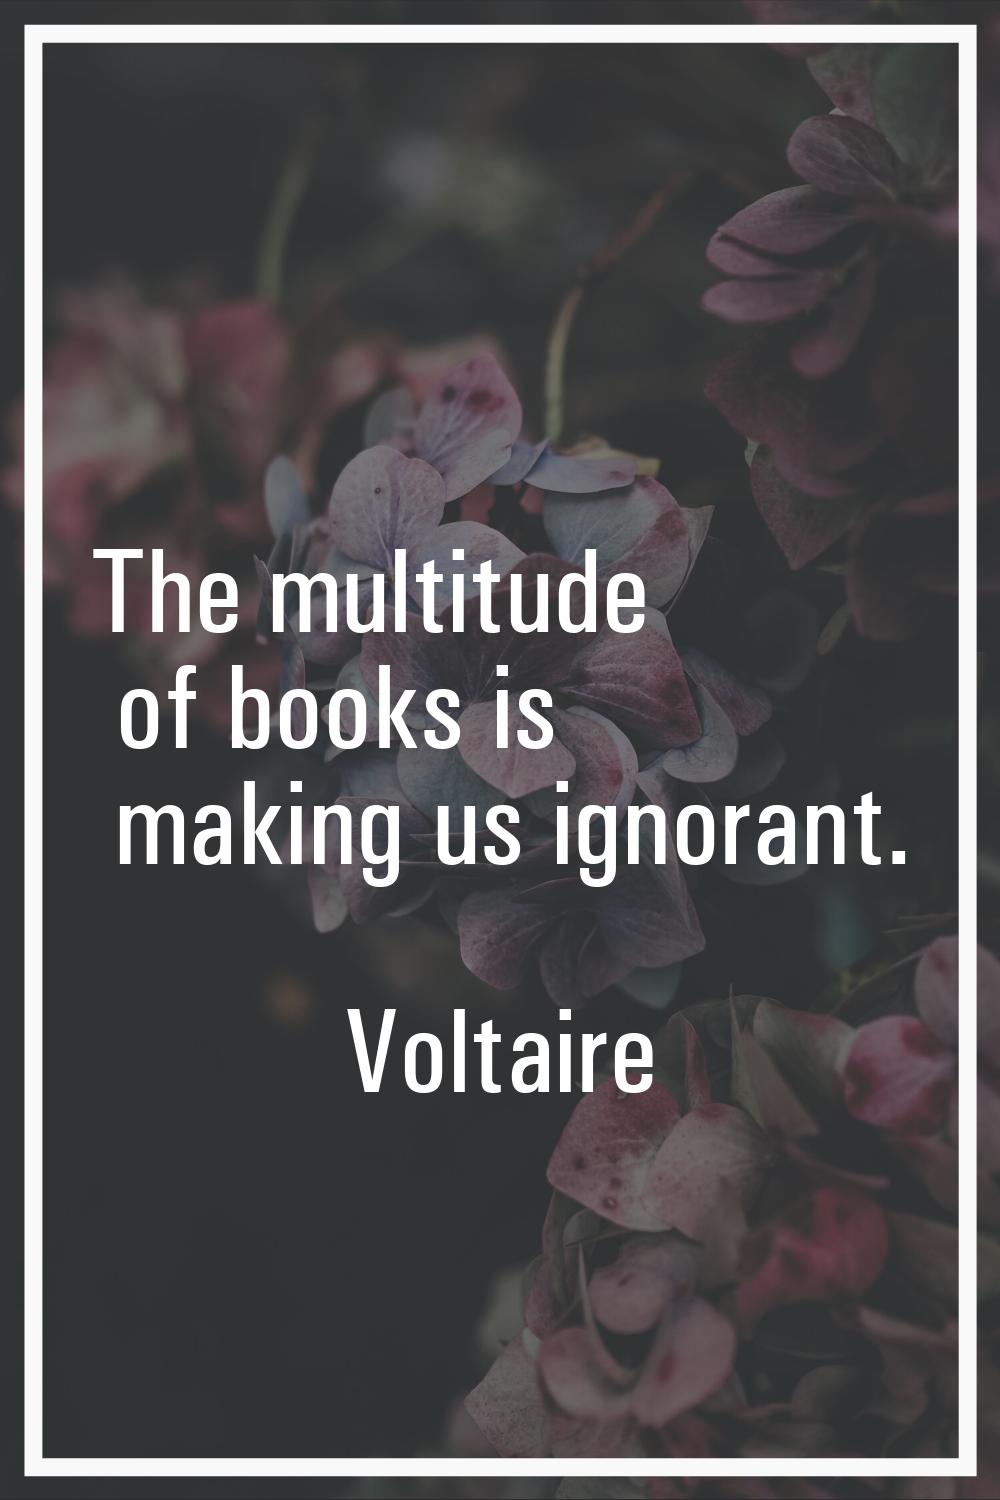 The multitude of books is making us ignorant.